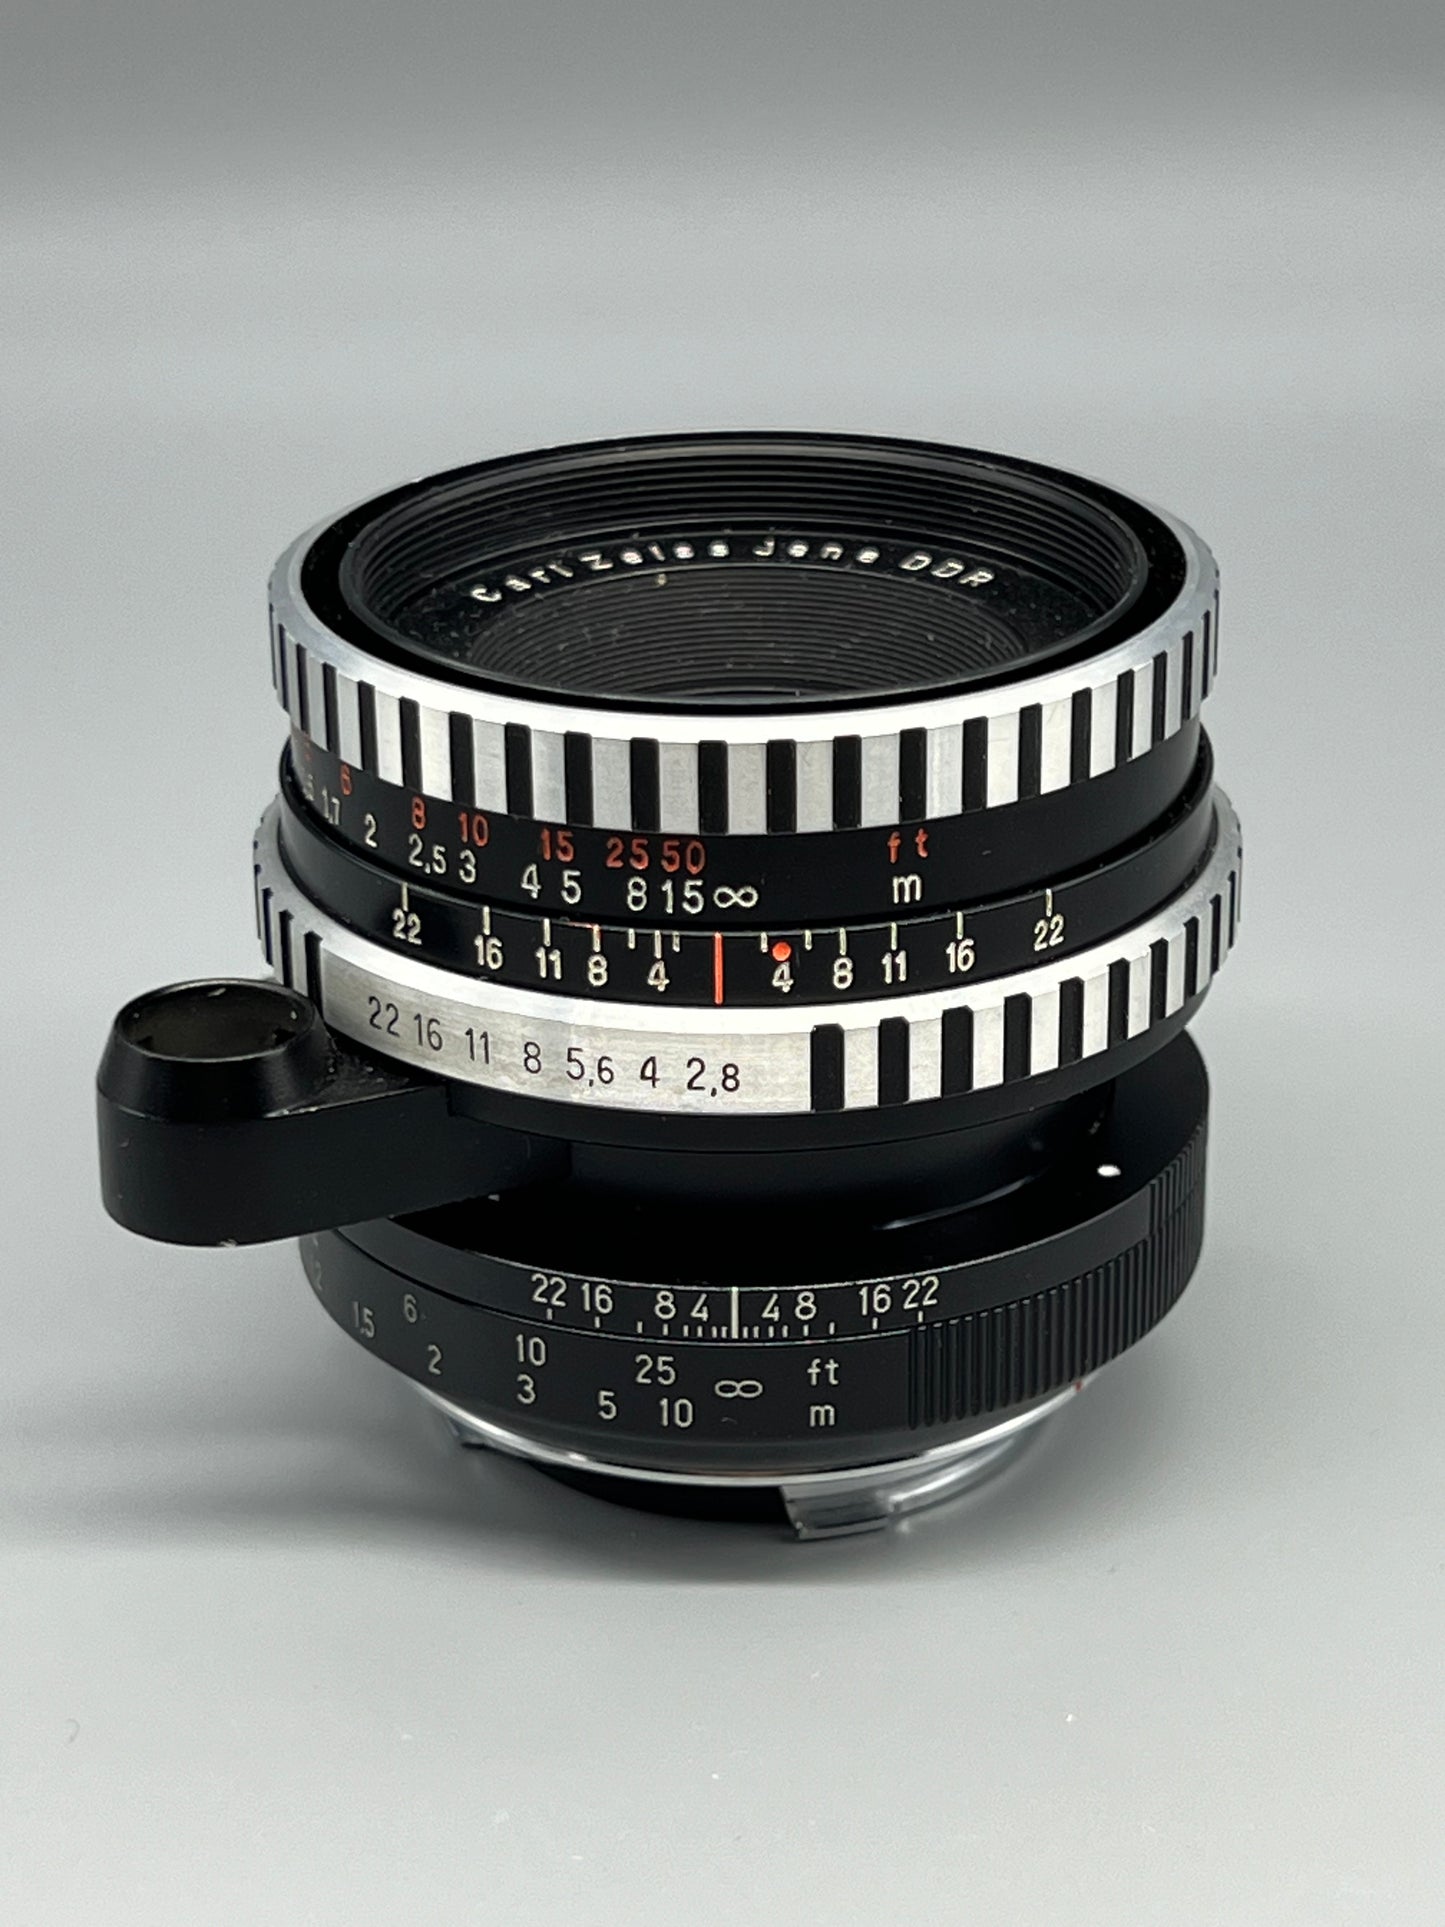 coupled EXA-LM（Version 2.0） R50 rangefinder-link adapter EXA mount lens to Leica M camera